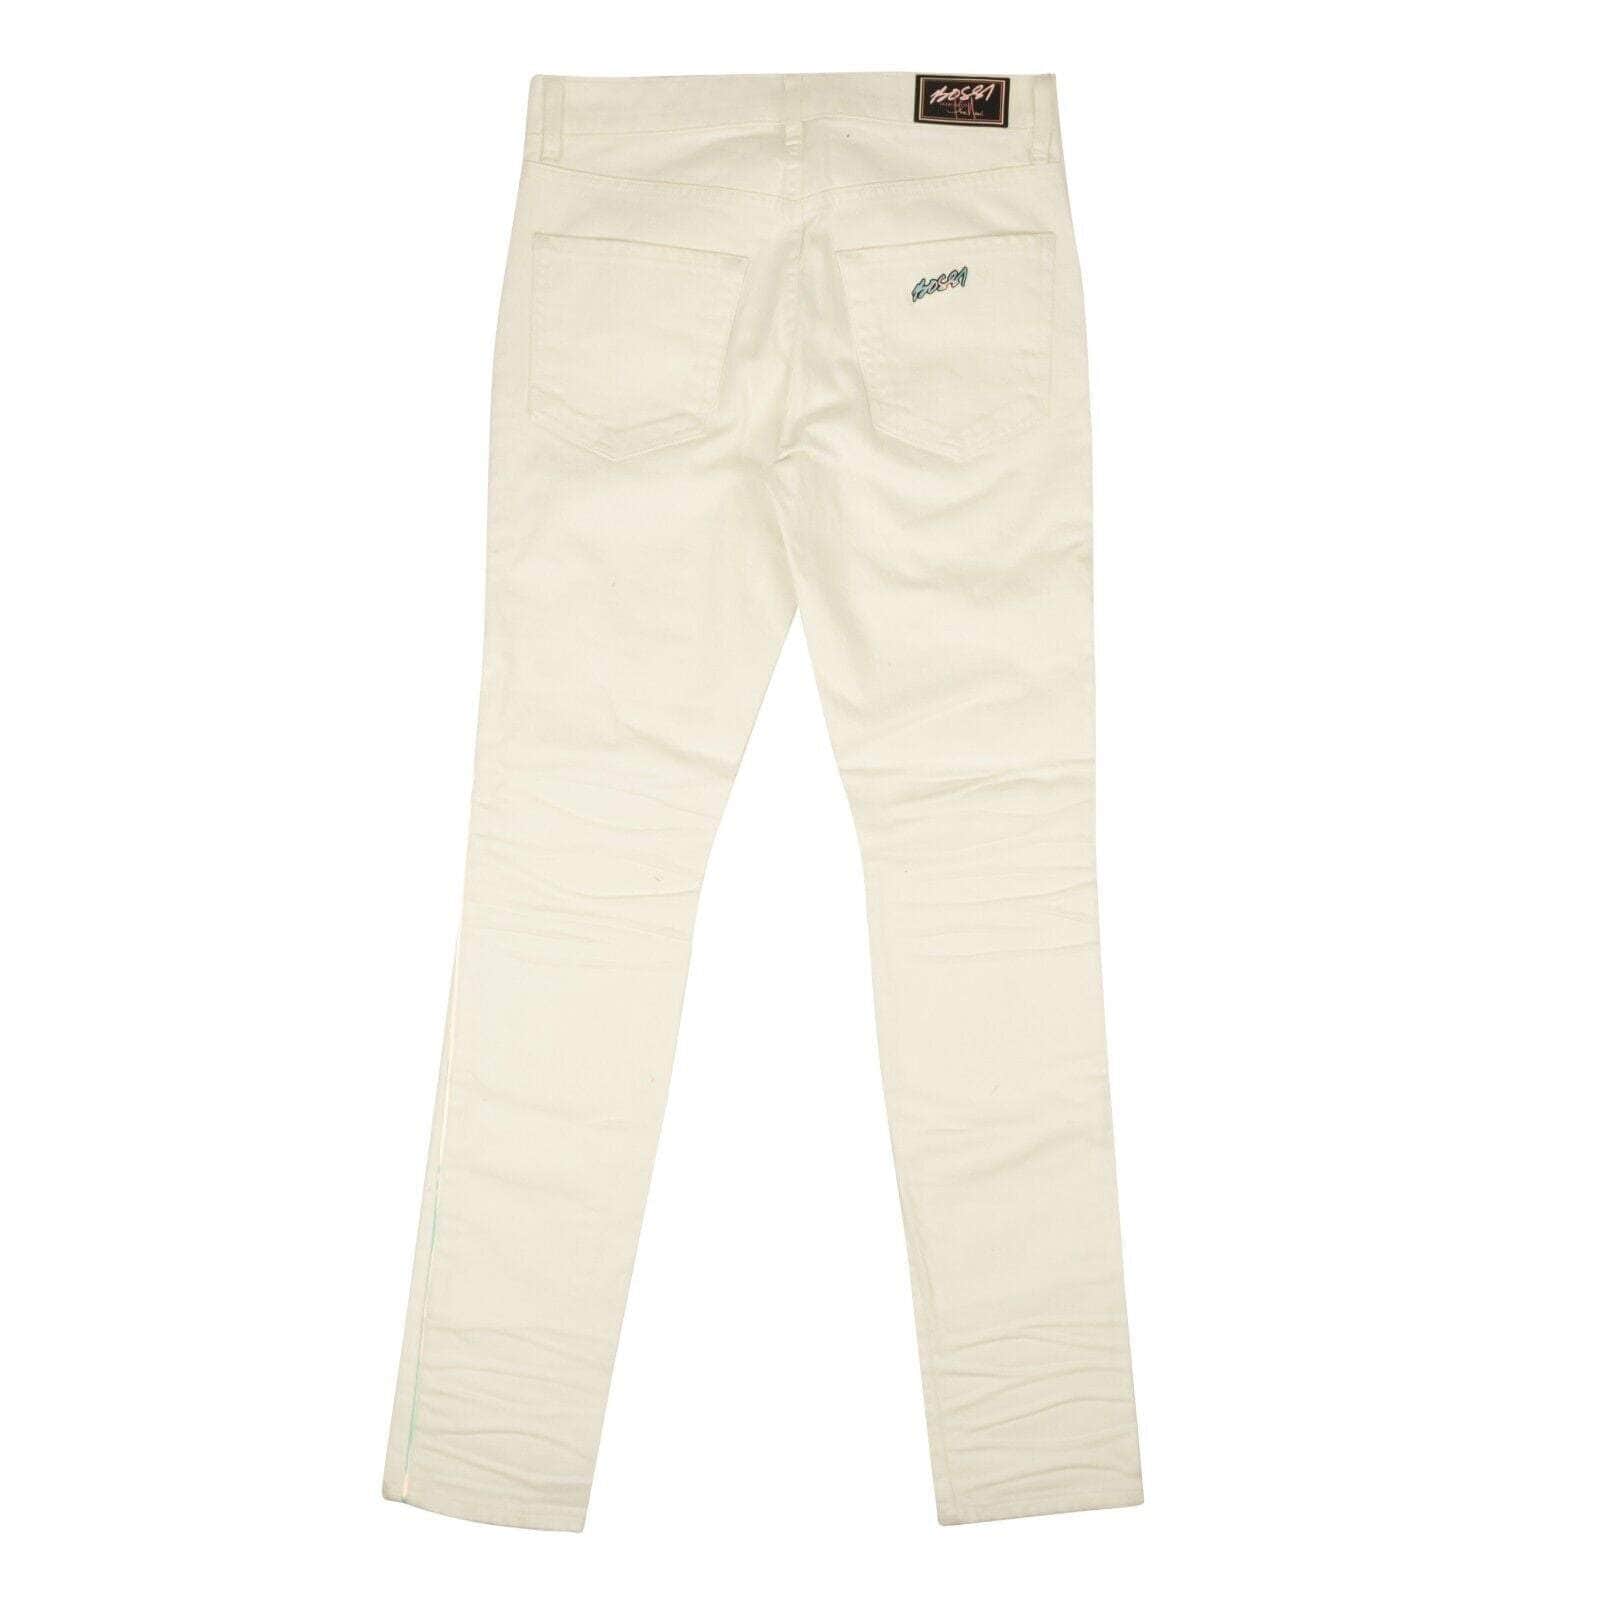 log interferens Pacific White Cotton 3D Stripe Detail Slim-Fit Jeans - GBNY